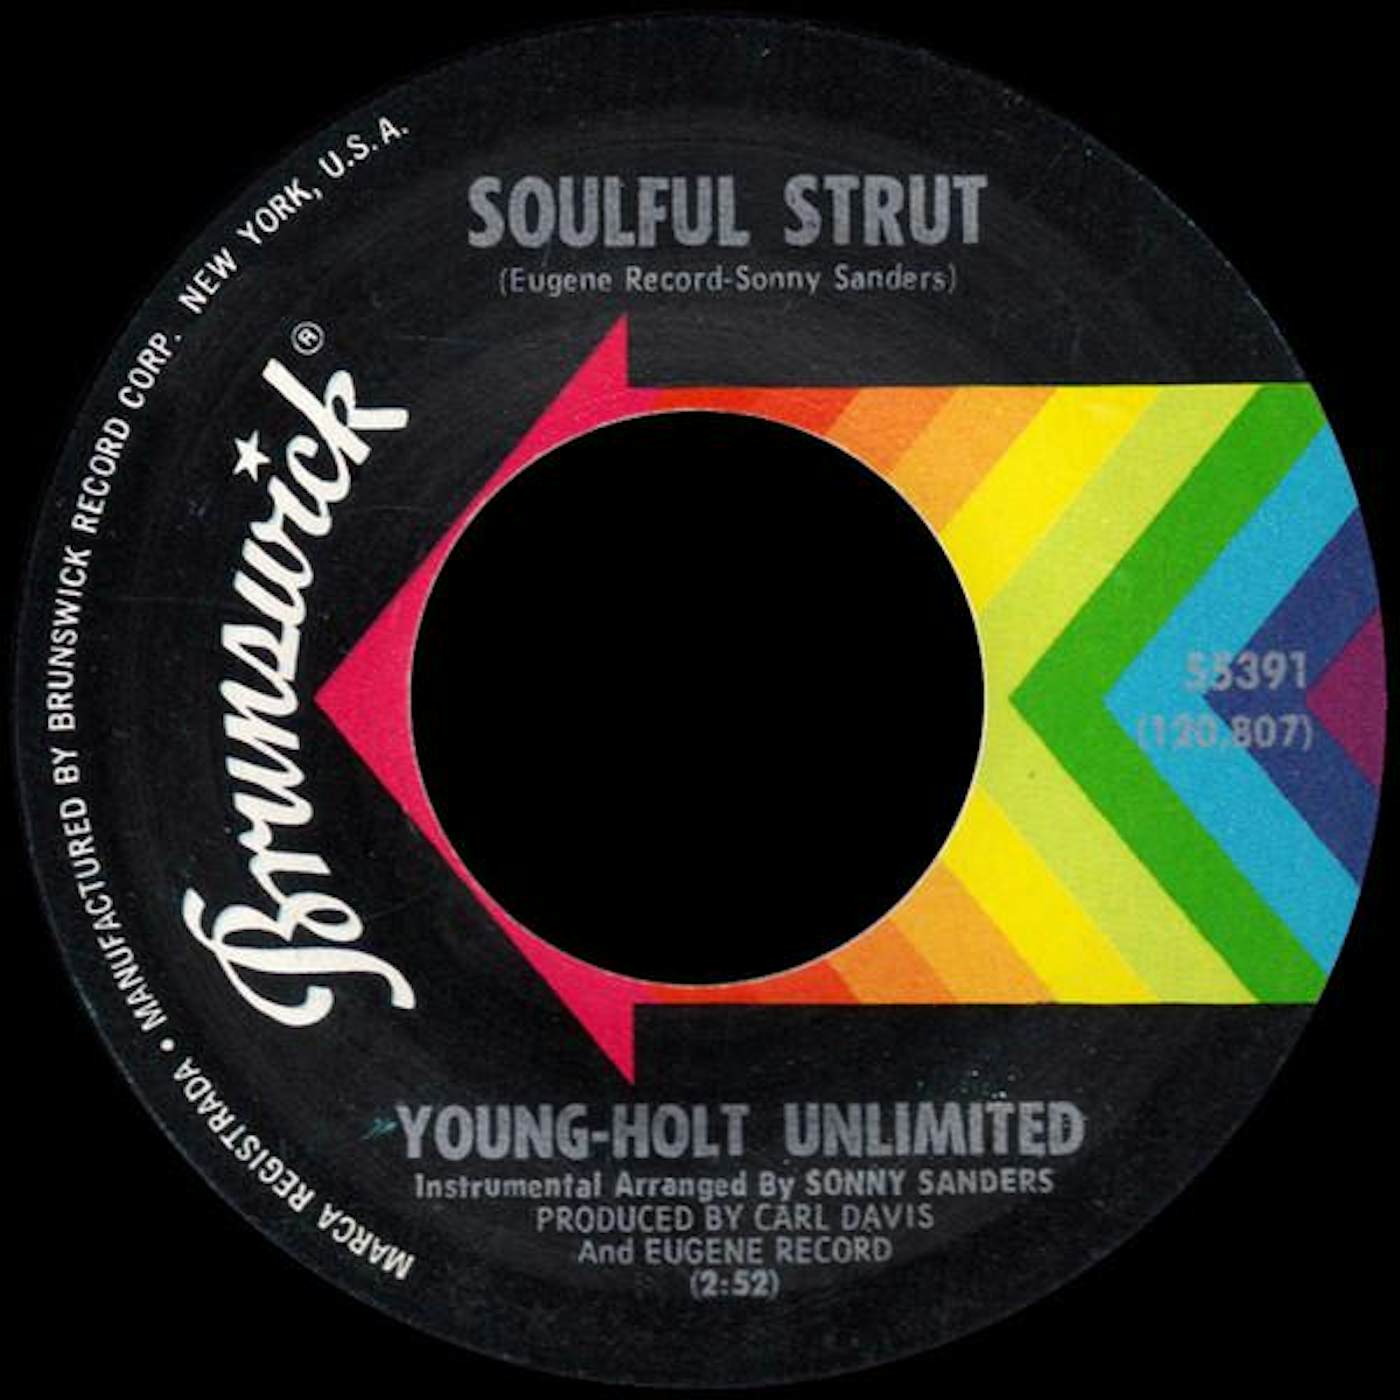 Young-Holt Unlimited SOULFUL STRUT CD